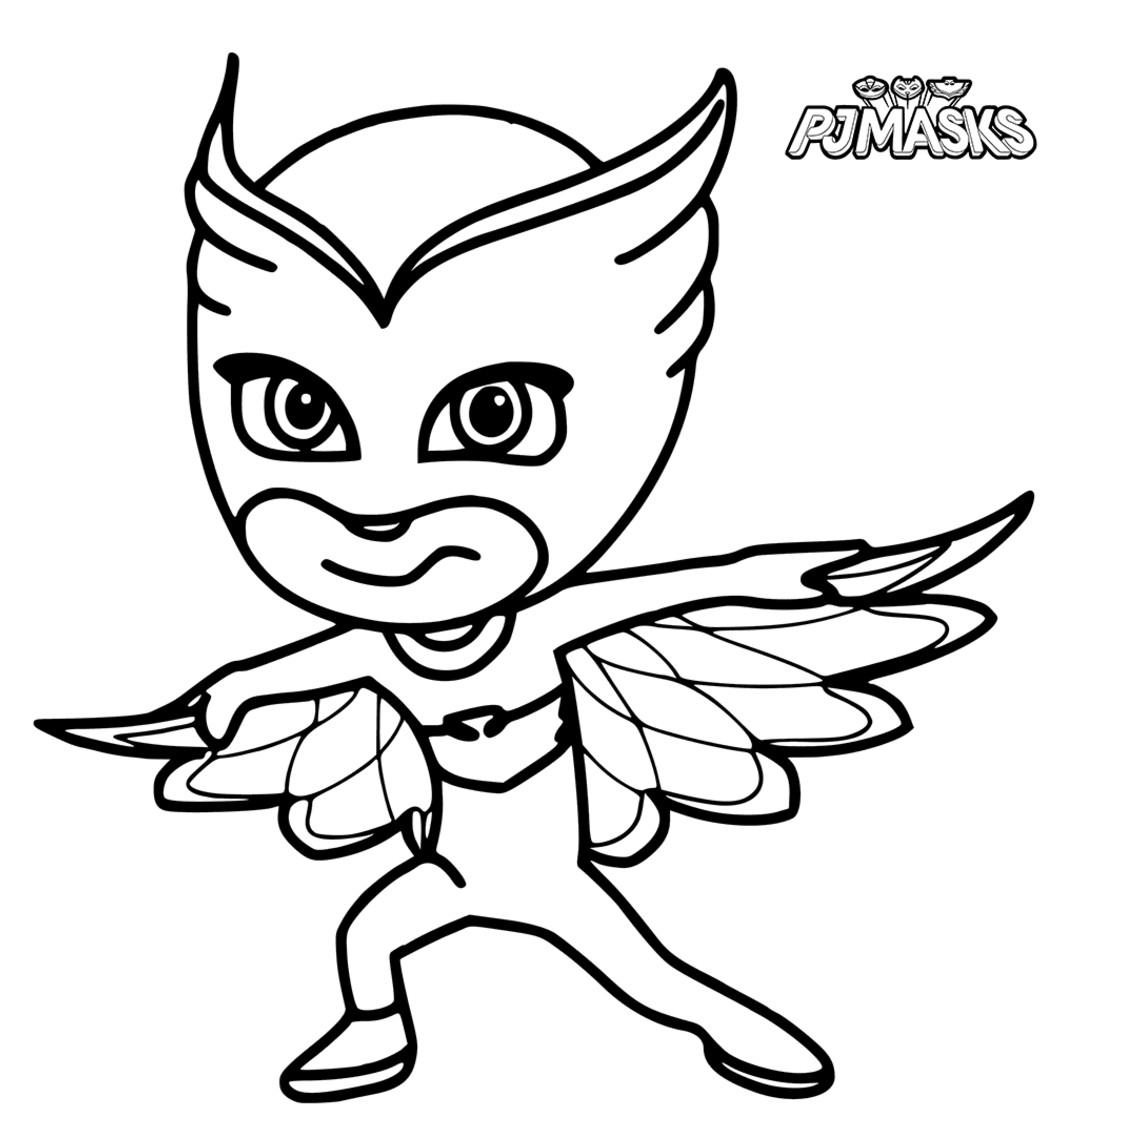 Pj Masks Coloring Pages Printable
 PJ Masks coloring pages to and print for free